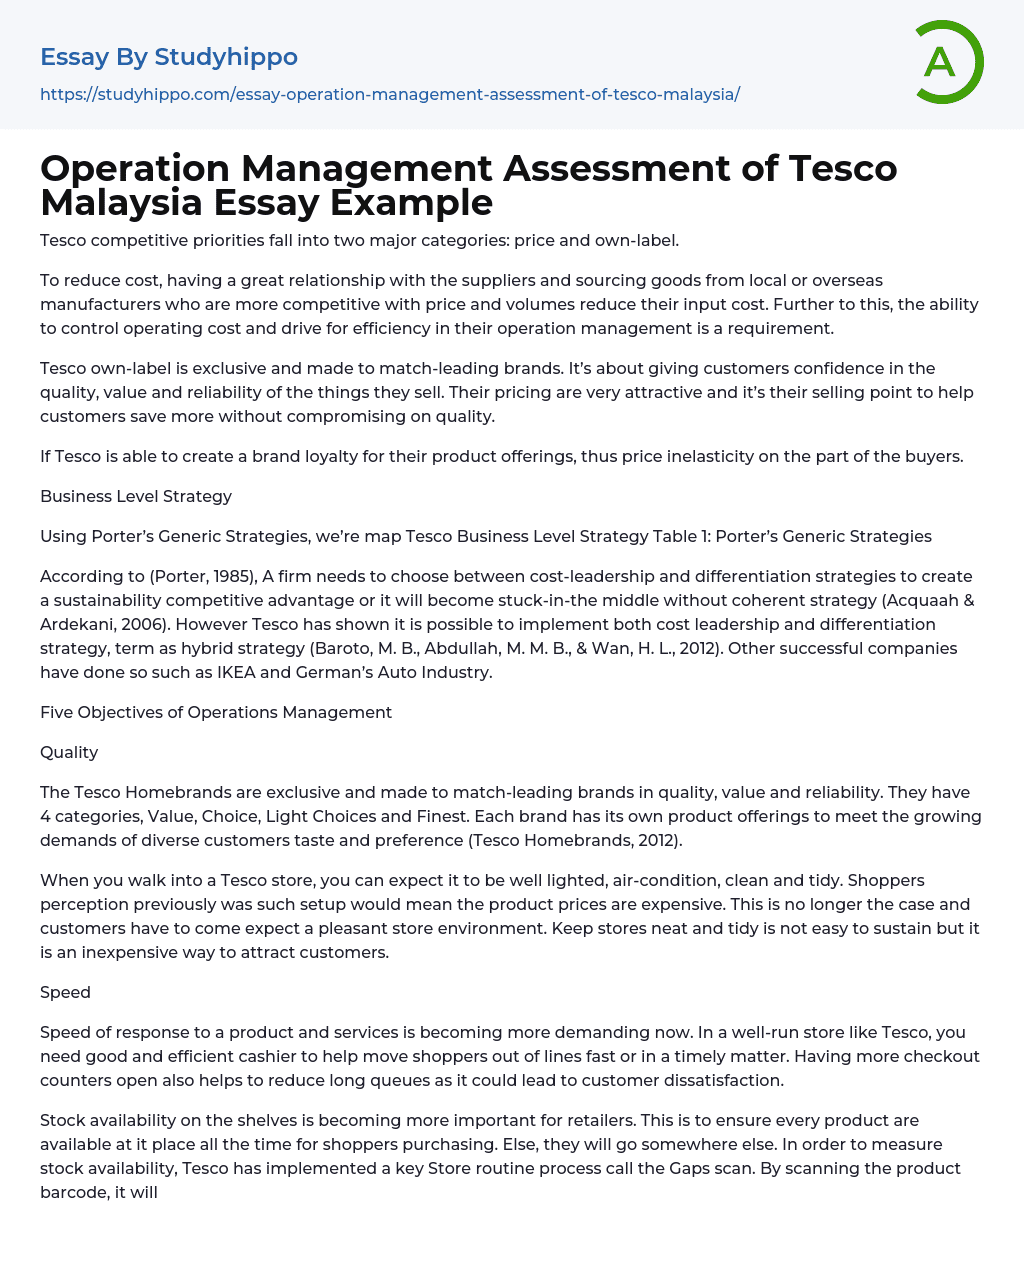 Operation Management Assessment of Tesco Malaysia Essay Example